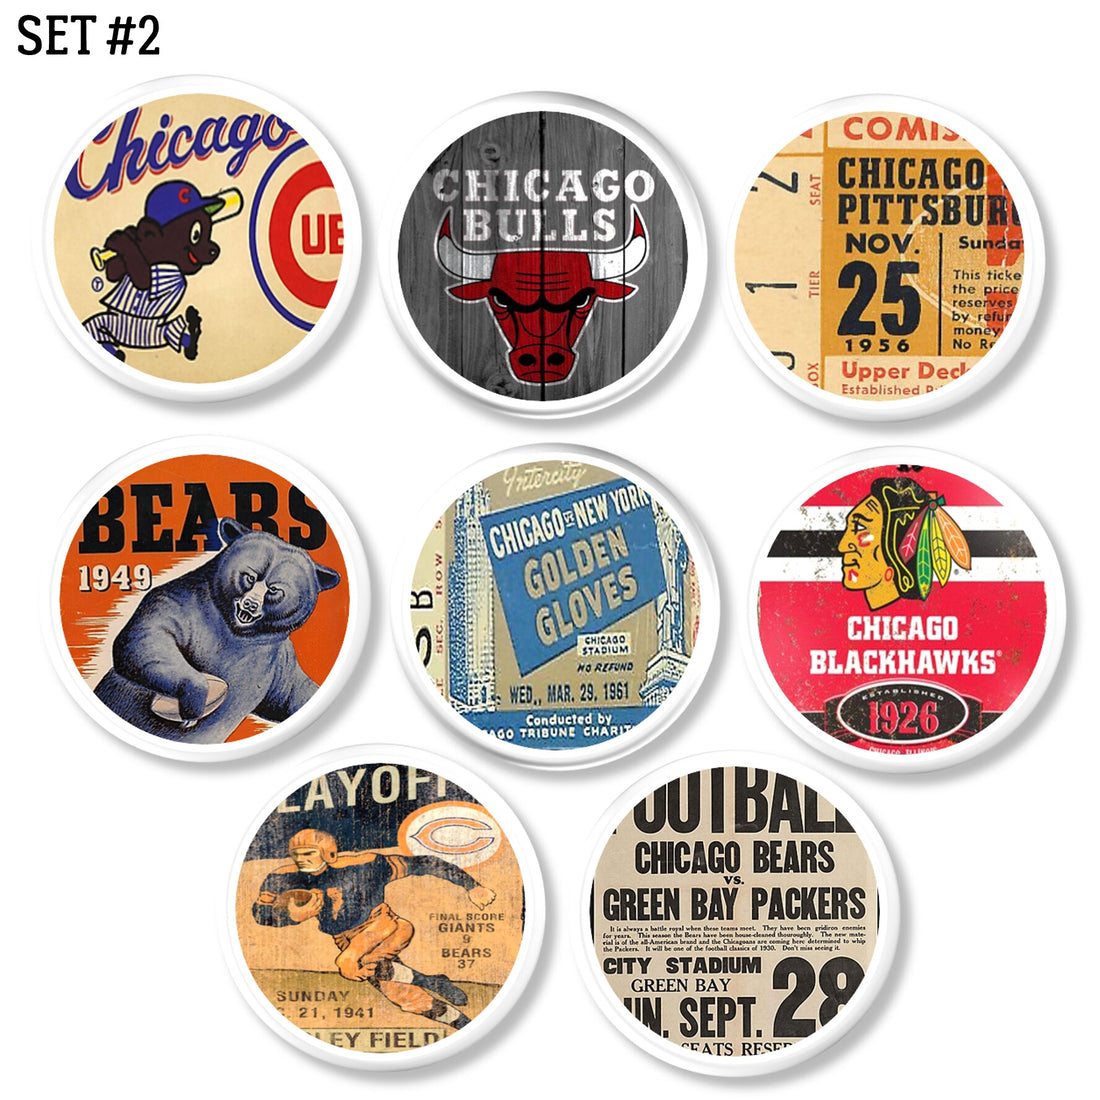 Decorative drawer pull set with old Chicago sports tickets and program illustrations on white base.